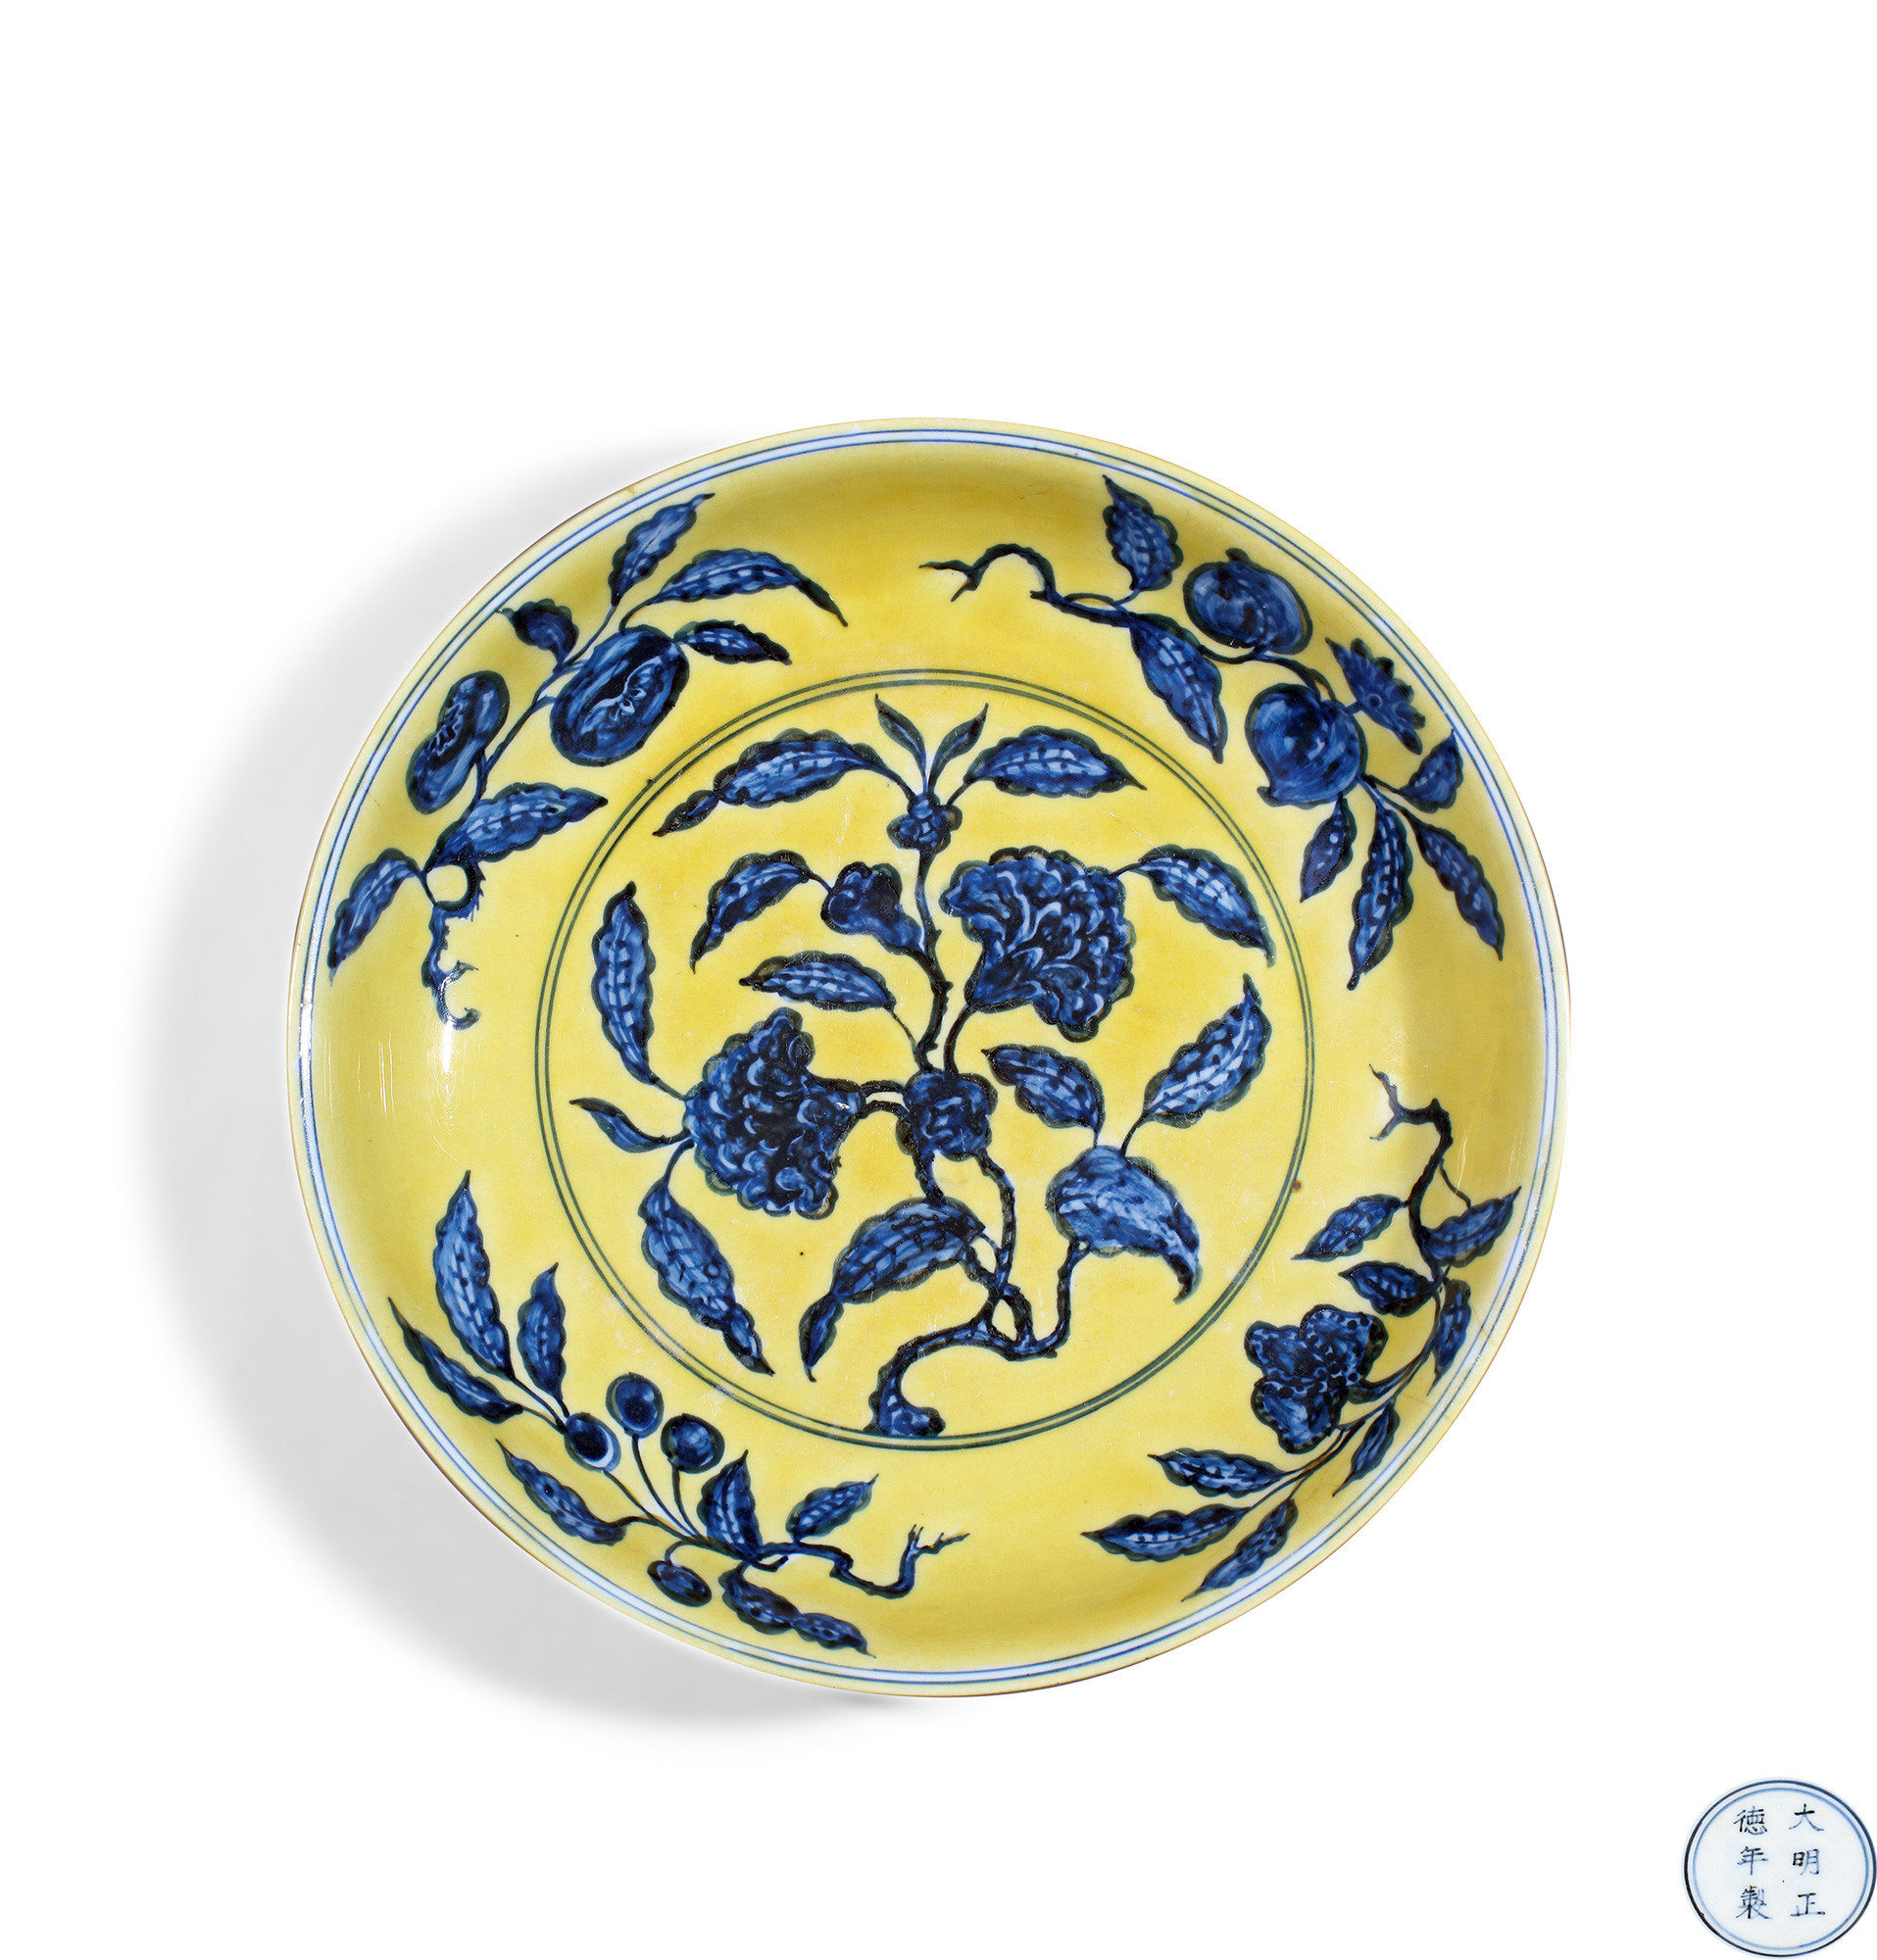 A RARE YELLOW-GROUND BLUE AND WHITE WITH POMEGRANATE FLORAL DISH